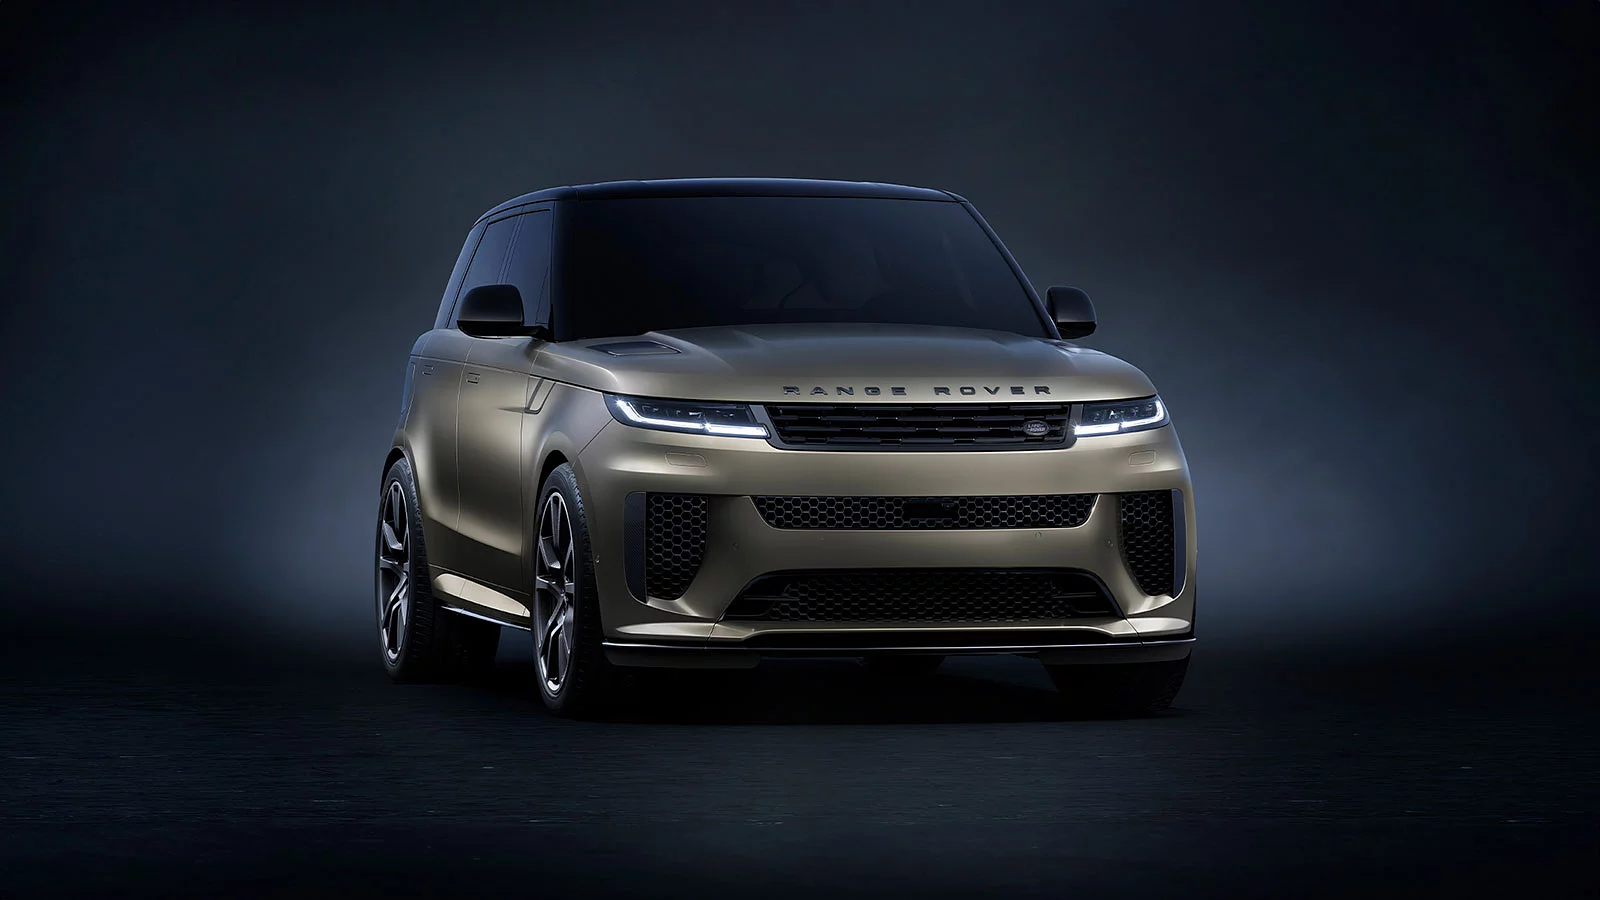 THE NEW RANGE ROVER SPORT SV EDITION ONE